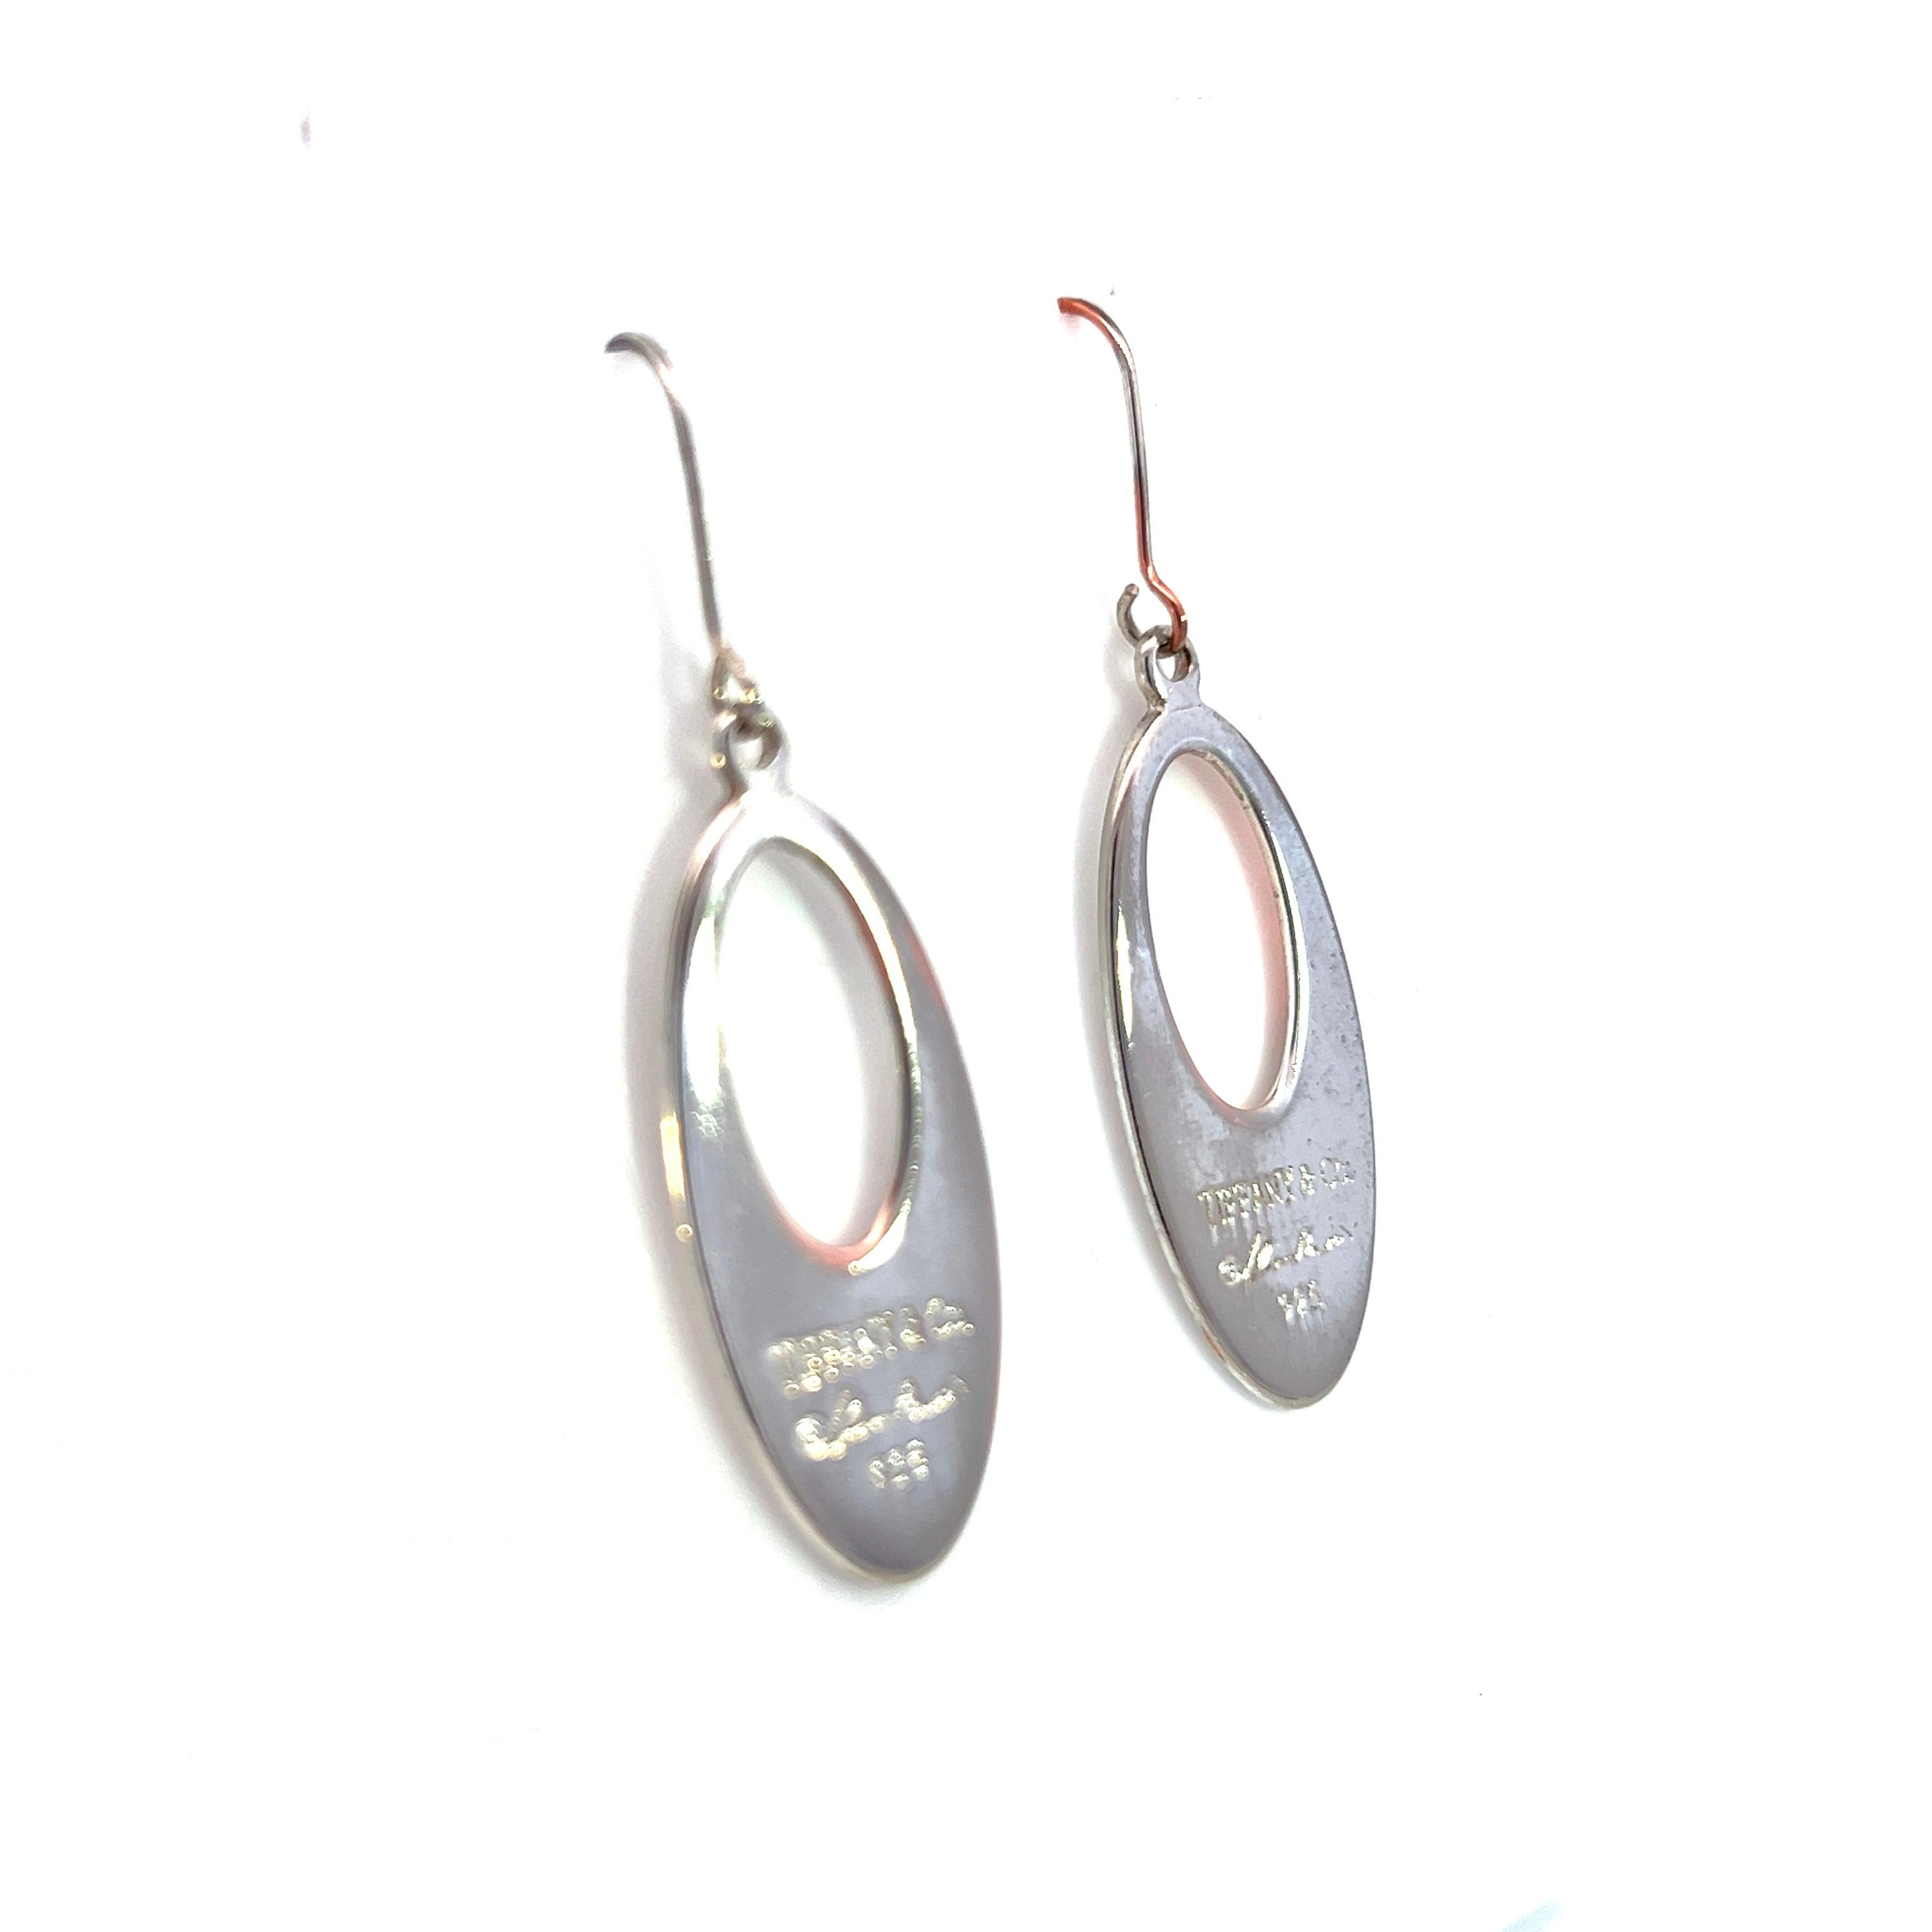 Authentic Tiffany & Co Estate Hanging Earrings Sterling Silver By Elsa Peretti 35 mm TIF558

TRUSTED SELLER SINCE 2002

PLEASE SEE OUR HUNDREDS OF POSITIVE FEEDBACKS FROM OUR CLIENTS!!

FREE SHIPPING

DETAILS
Style: Hanging Earrings
Designer: Elsa